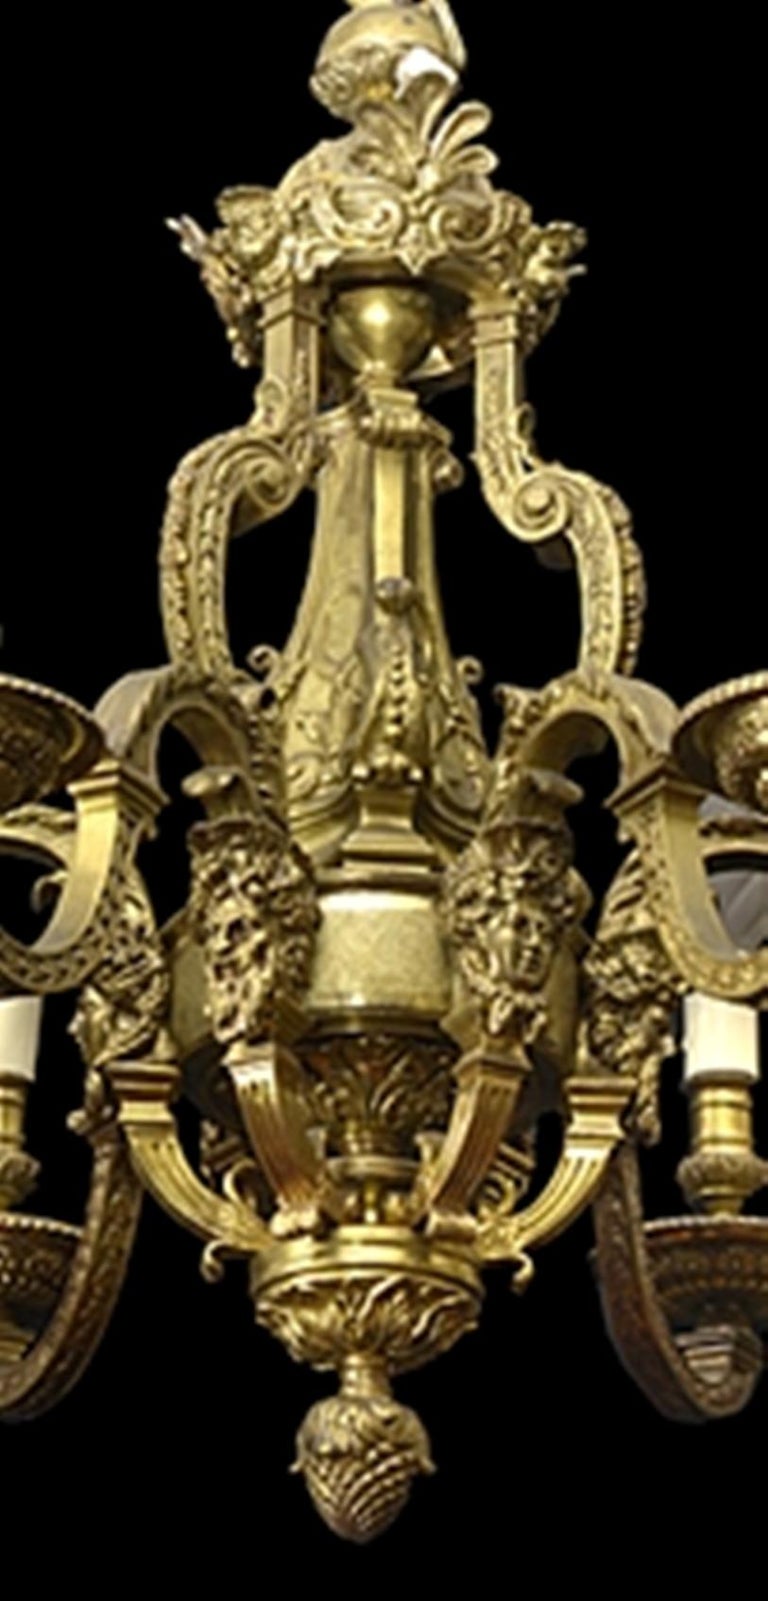 Late 19th Century French Six Arm Brass Chandelier in the Louis XIV Style For Sale at 1stdibs